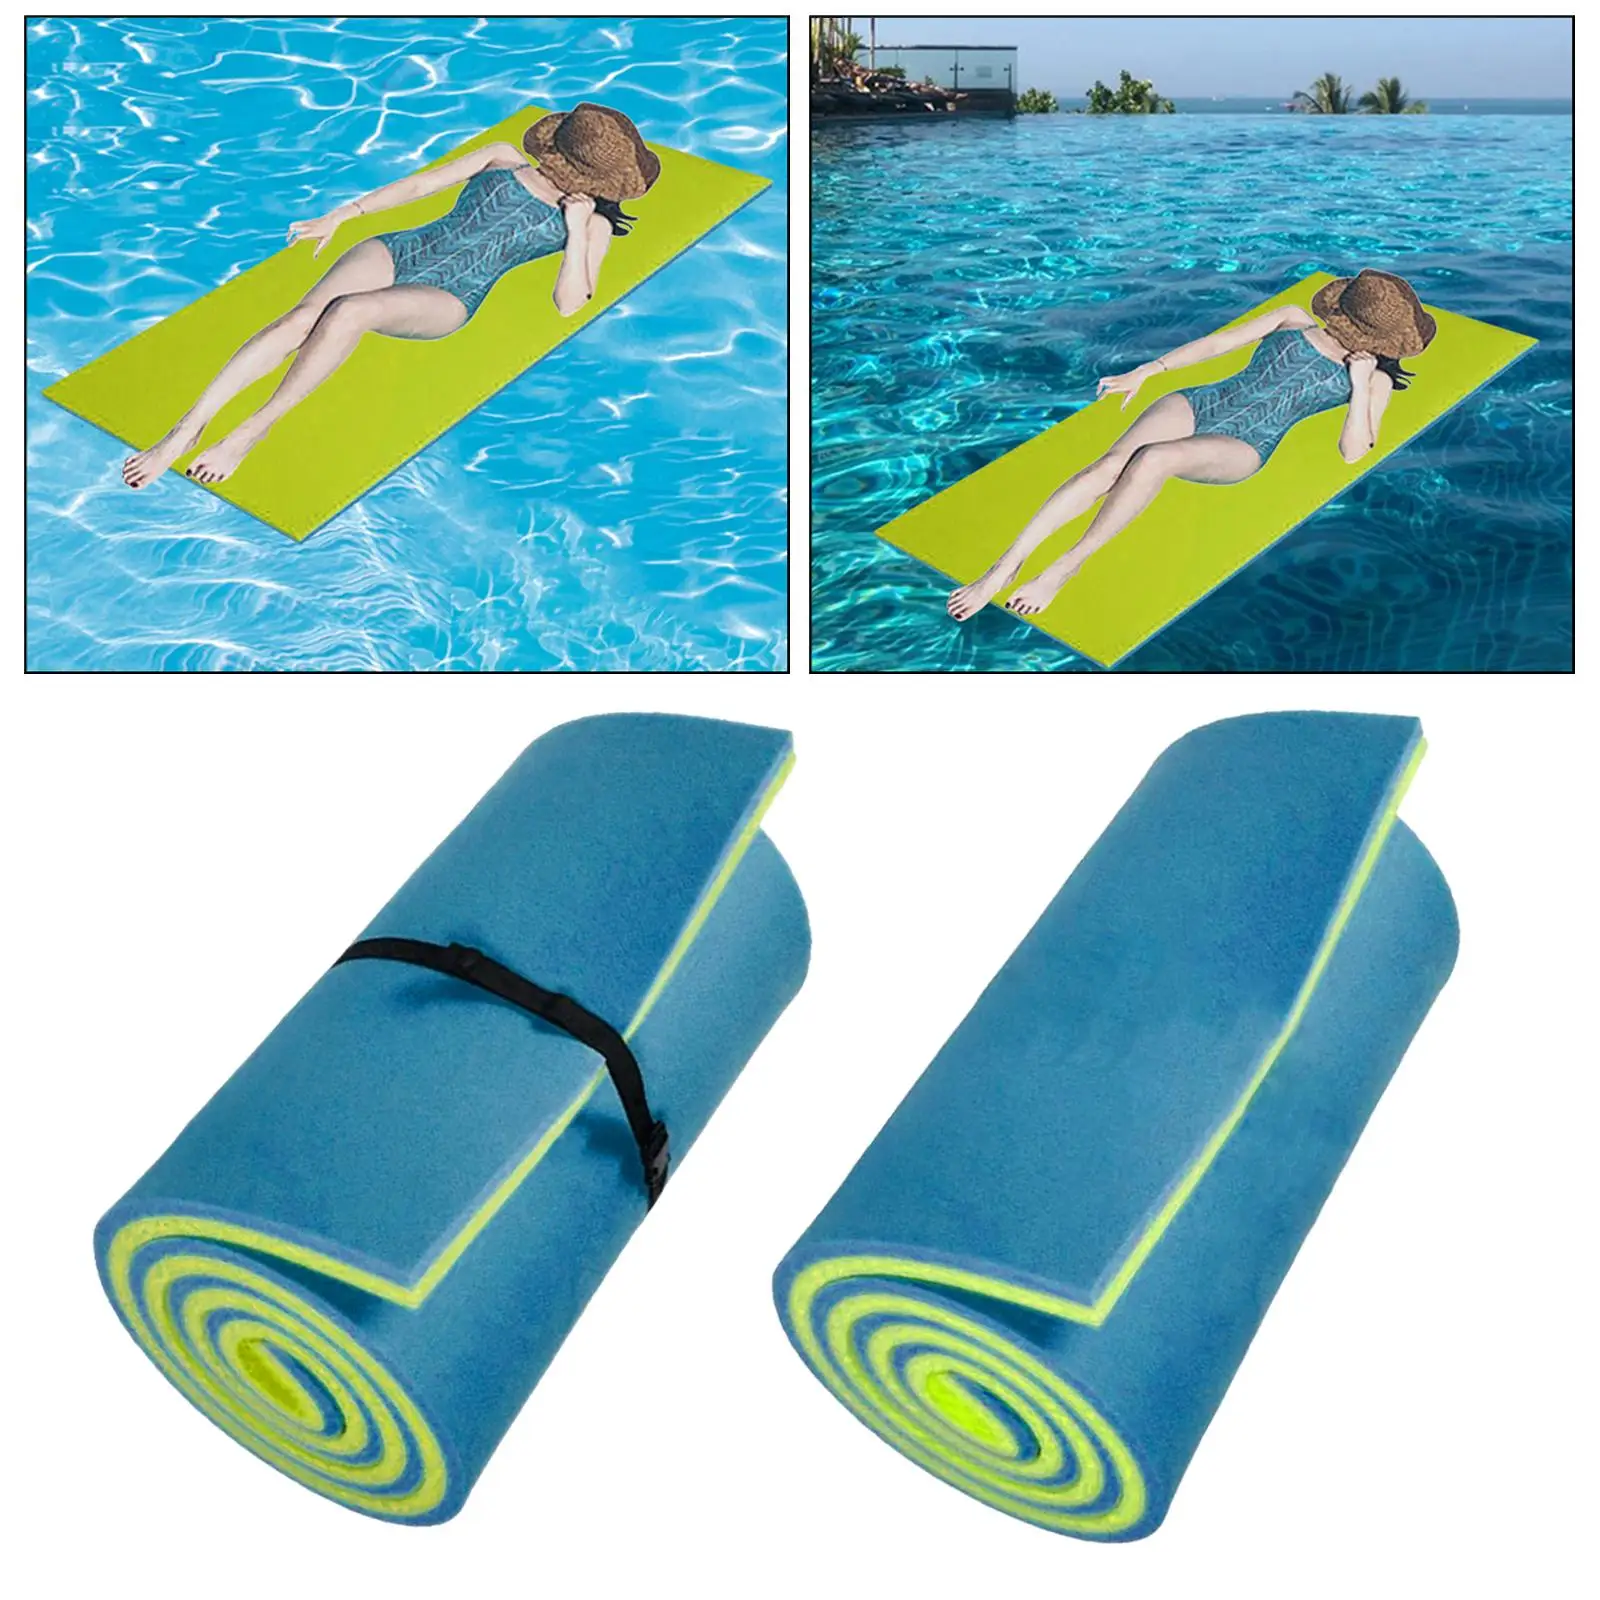 Water Float Mat Floating Pad, Adults Durable Floating Raft for Lounge Mattress, for Play Outdoor Lake Family Fun Swimming Pool